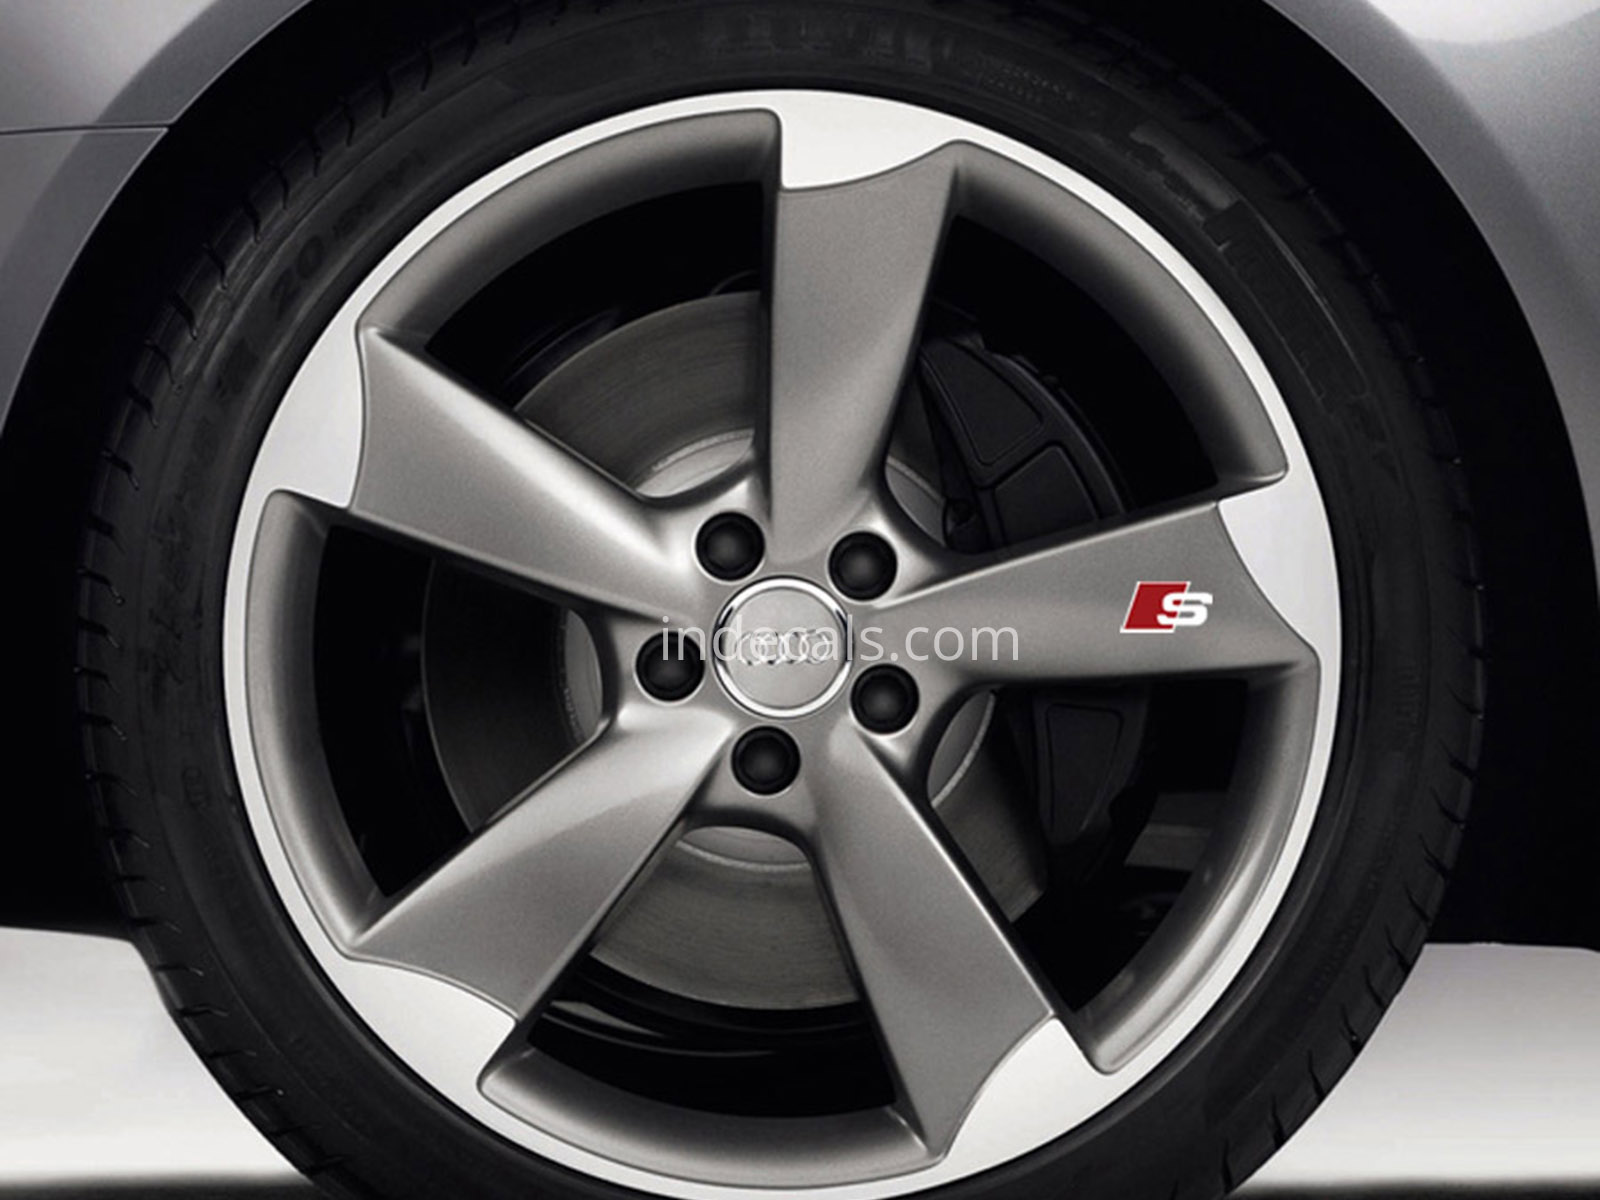 5 x Audi S-Line Stickers for Wheels - White + Red